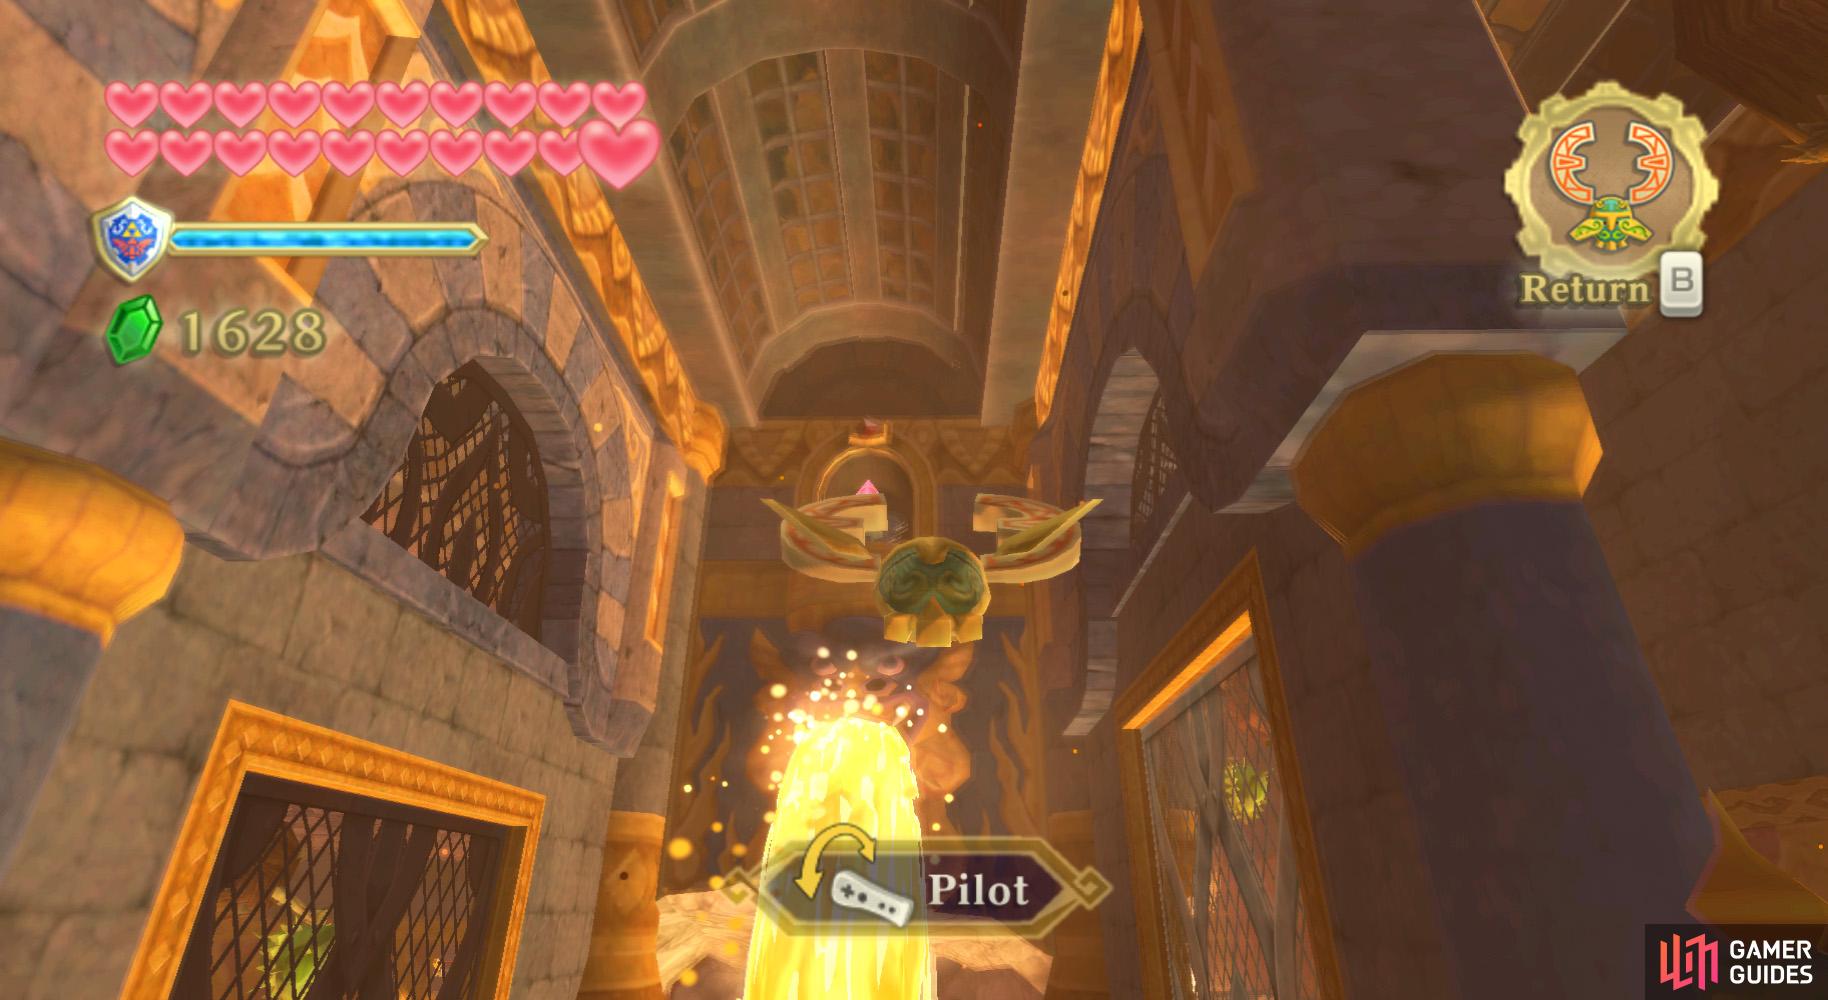 While riding the second platform, quickly disable the crystal switch above the lava waterfall directly ahead.